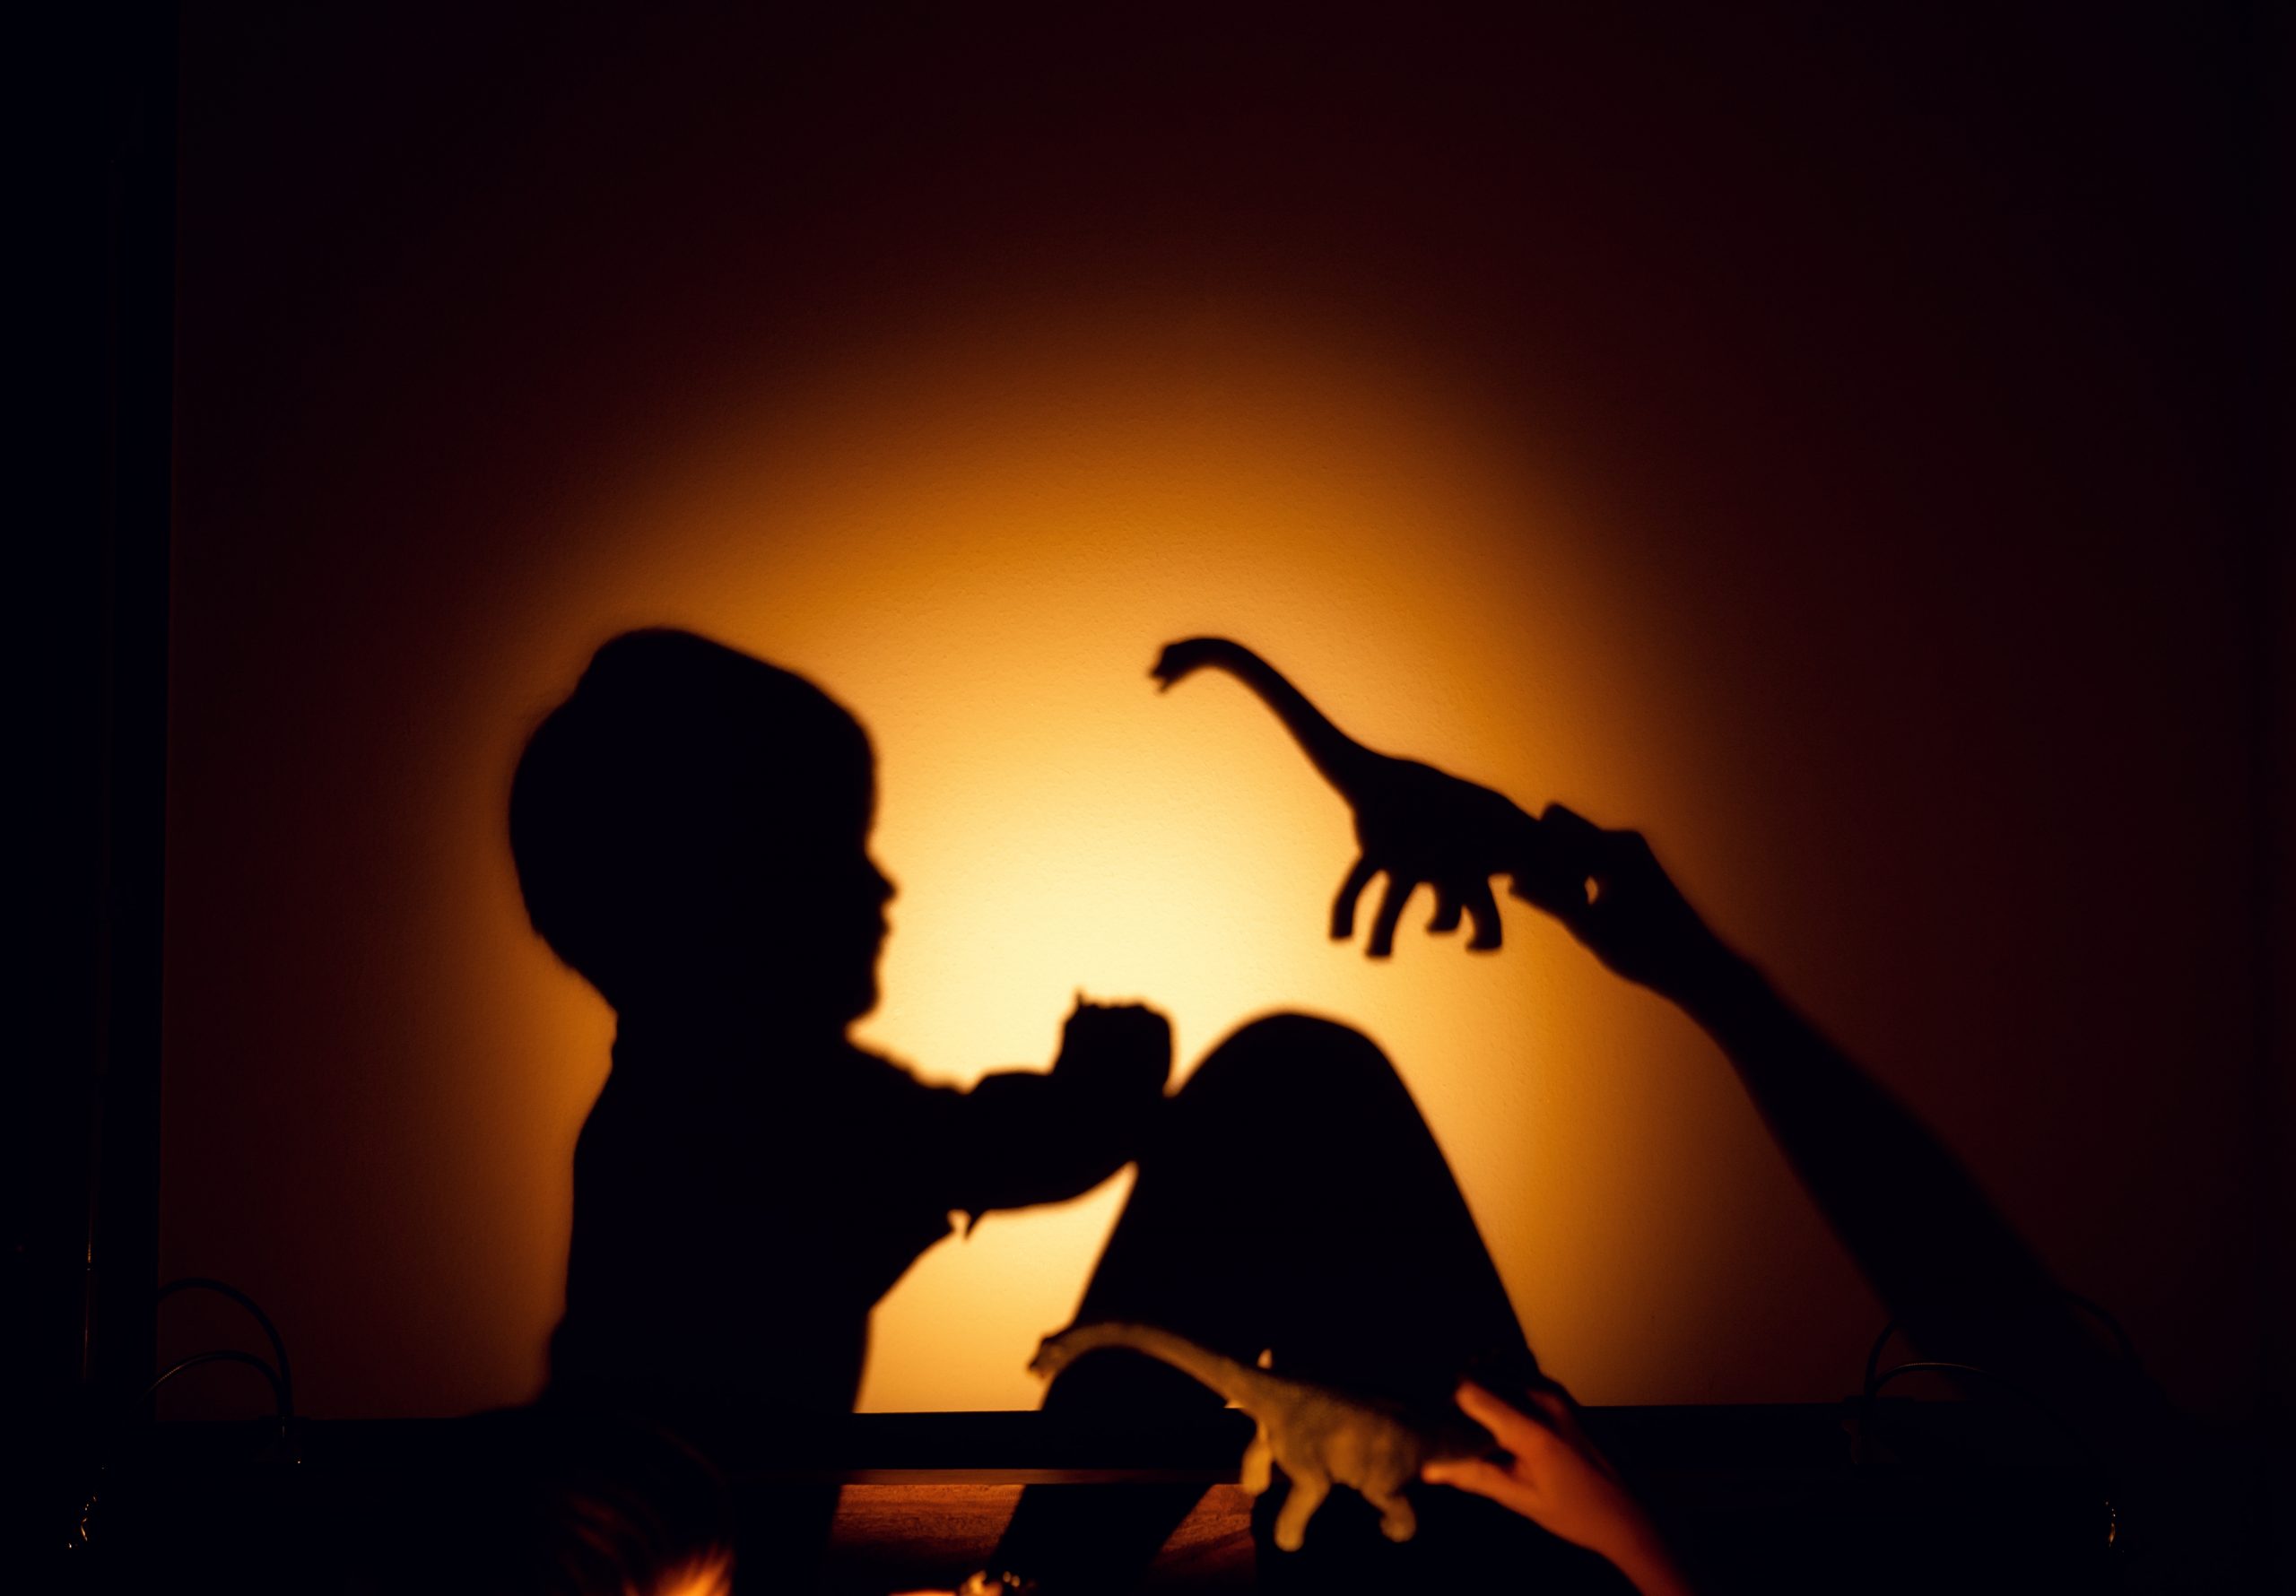 children-playing-shadow-theatre-game-at-home-at-ni-2023-11-27-05-25-23-utc